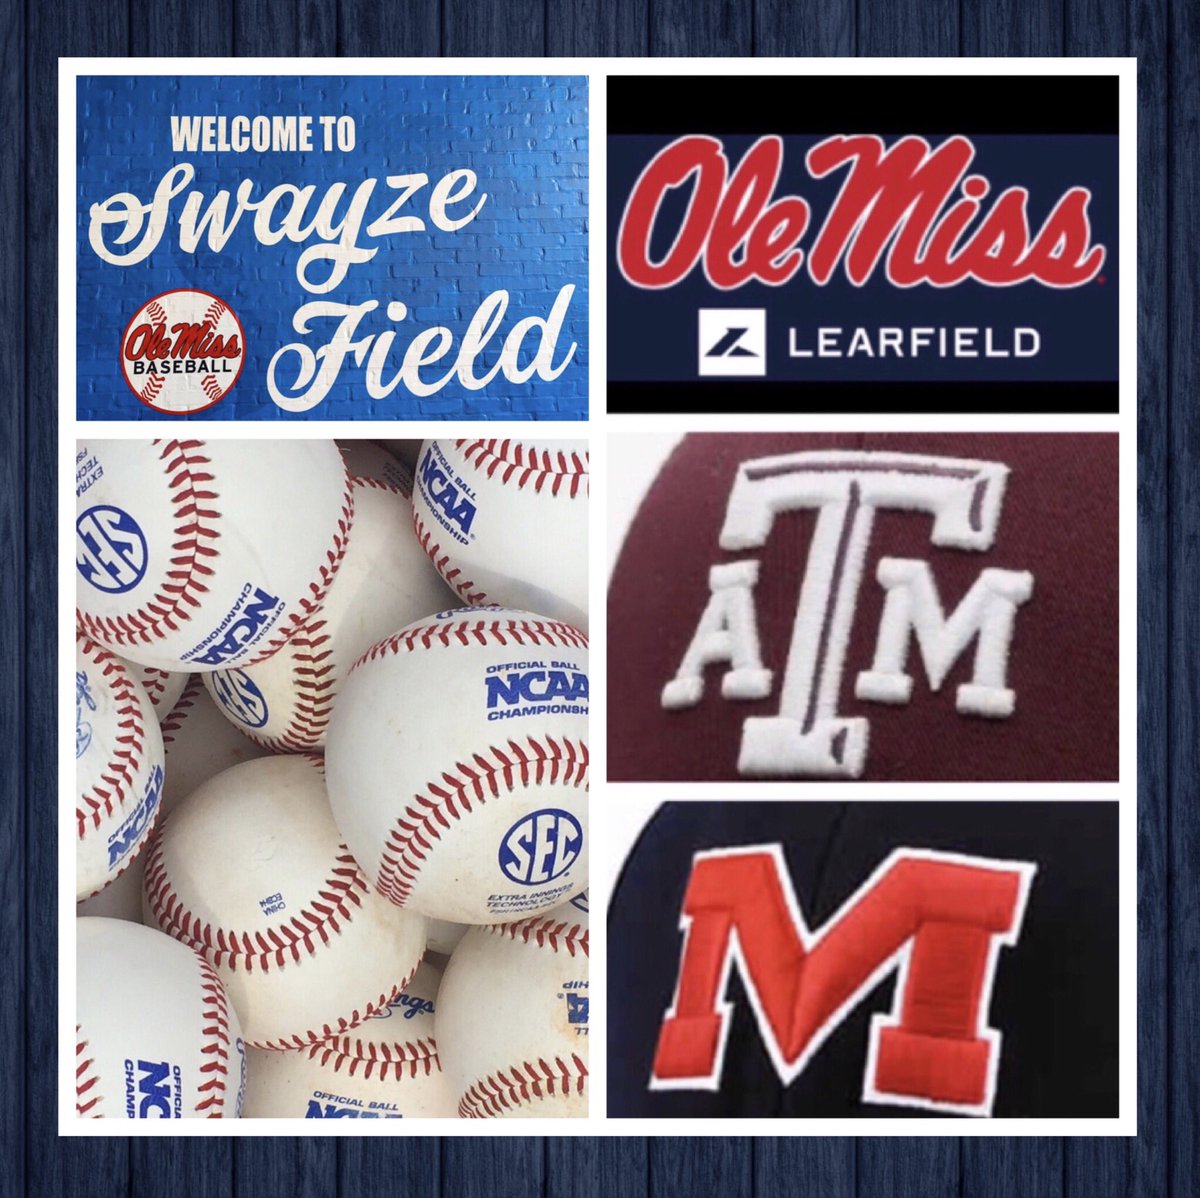 Tonight @OleMissBSB hosts TXAM in game one of the final home SEC series. 1st pitch is 7:30pm & airtime on the @OleMissNetwork is 7 w/@RebVoice & @HenduReb! Listen 🎧⬇️ 📻 Local radio olemisssports.com/sports/2018/7/… 📱 @OleMissSports app 💻 online olemisssports.com/watch?Live=992…